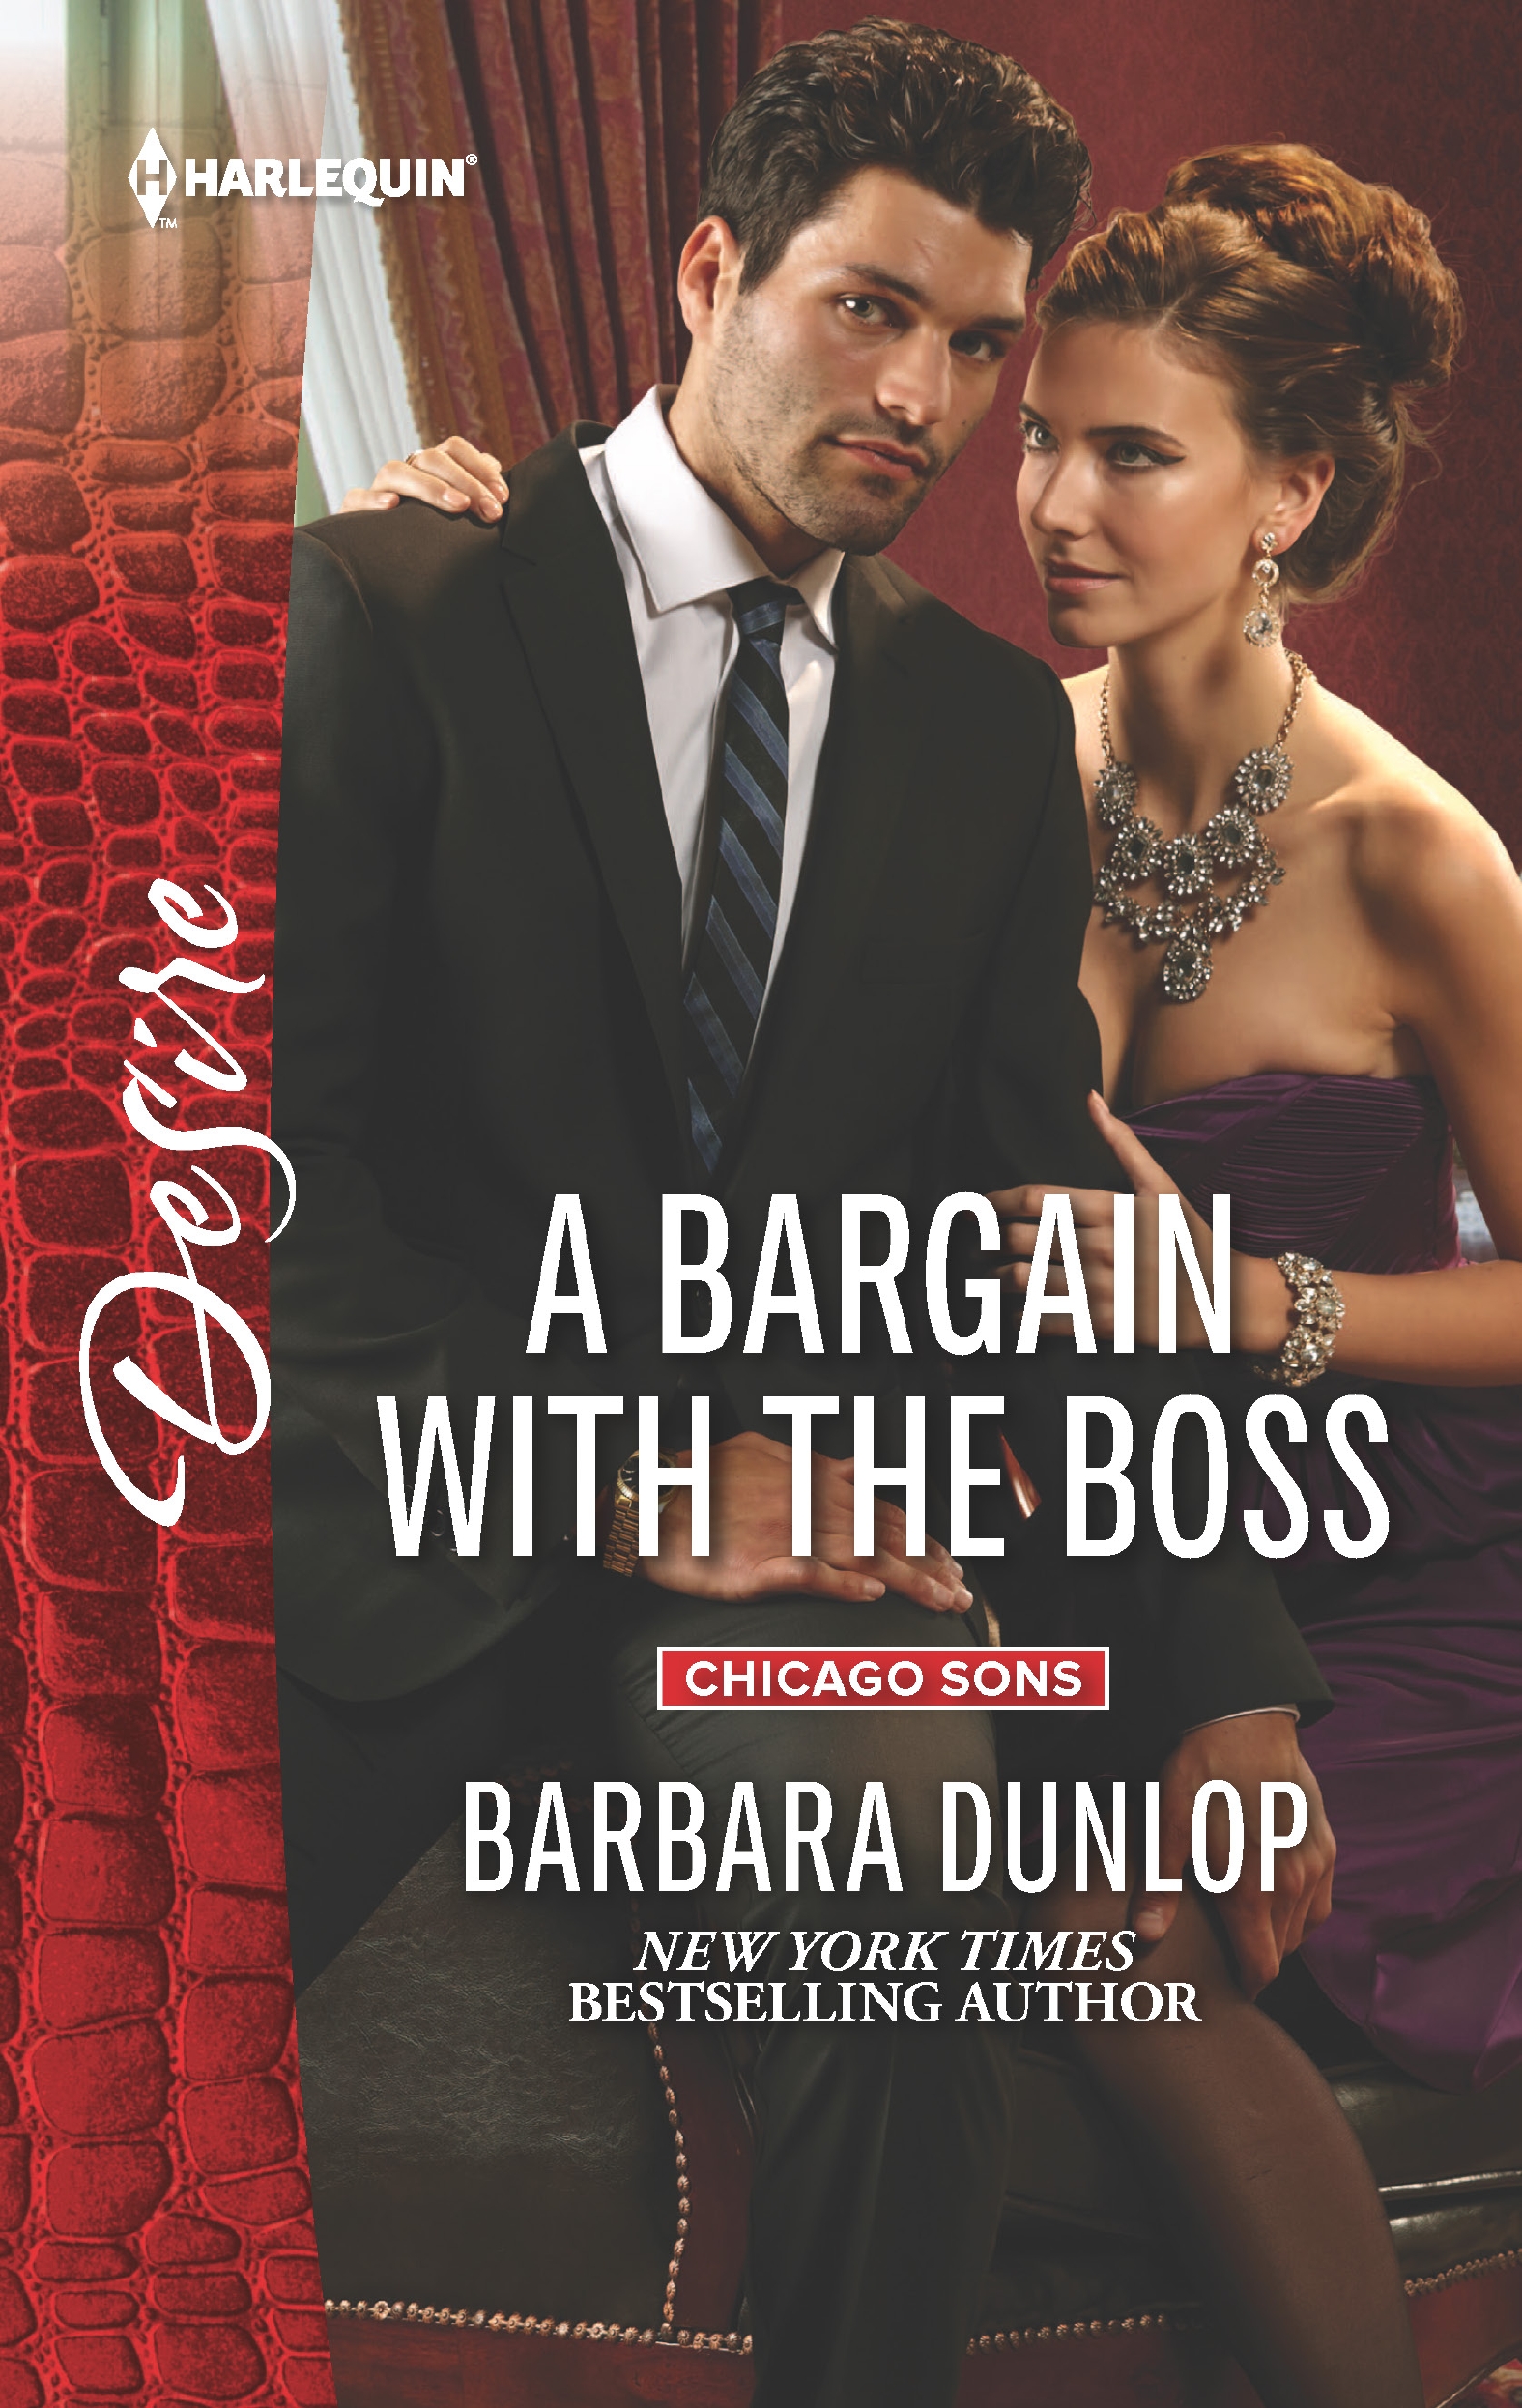 A Bargain with the Boss (2016) by Barbara Dunlop